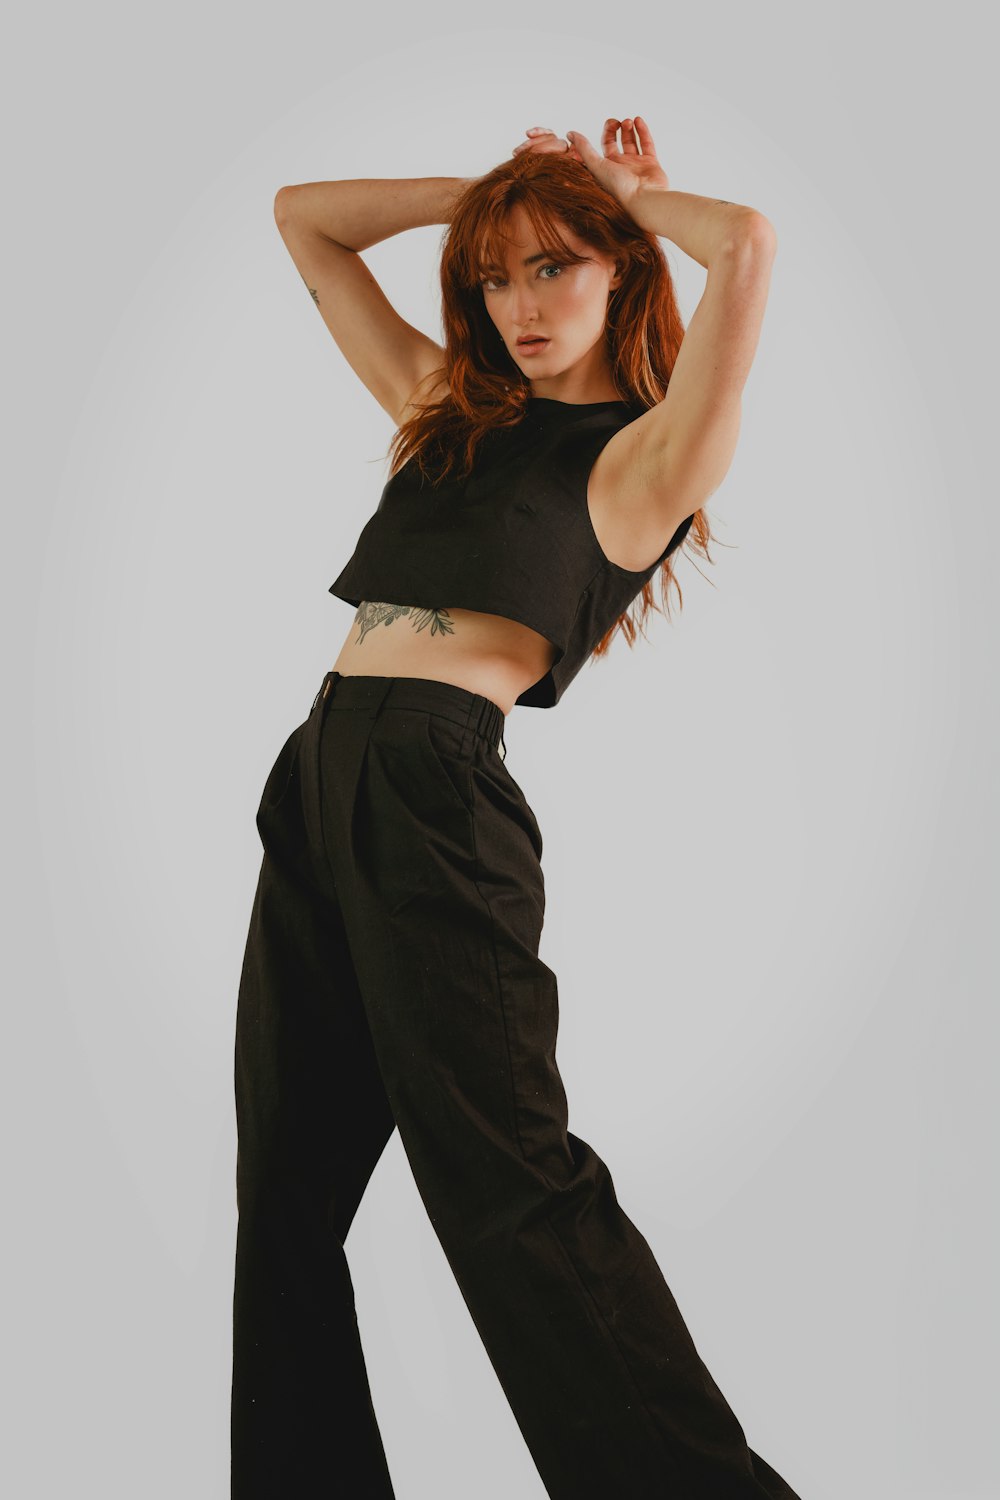 a woman in black pants and a crop top